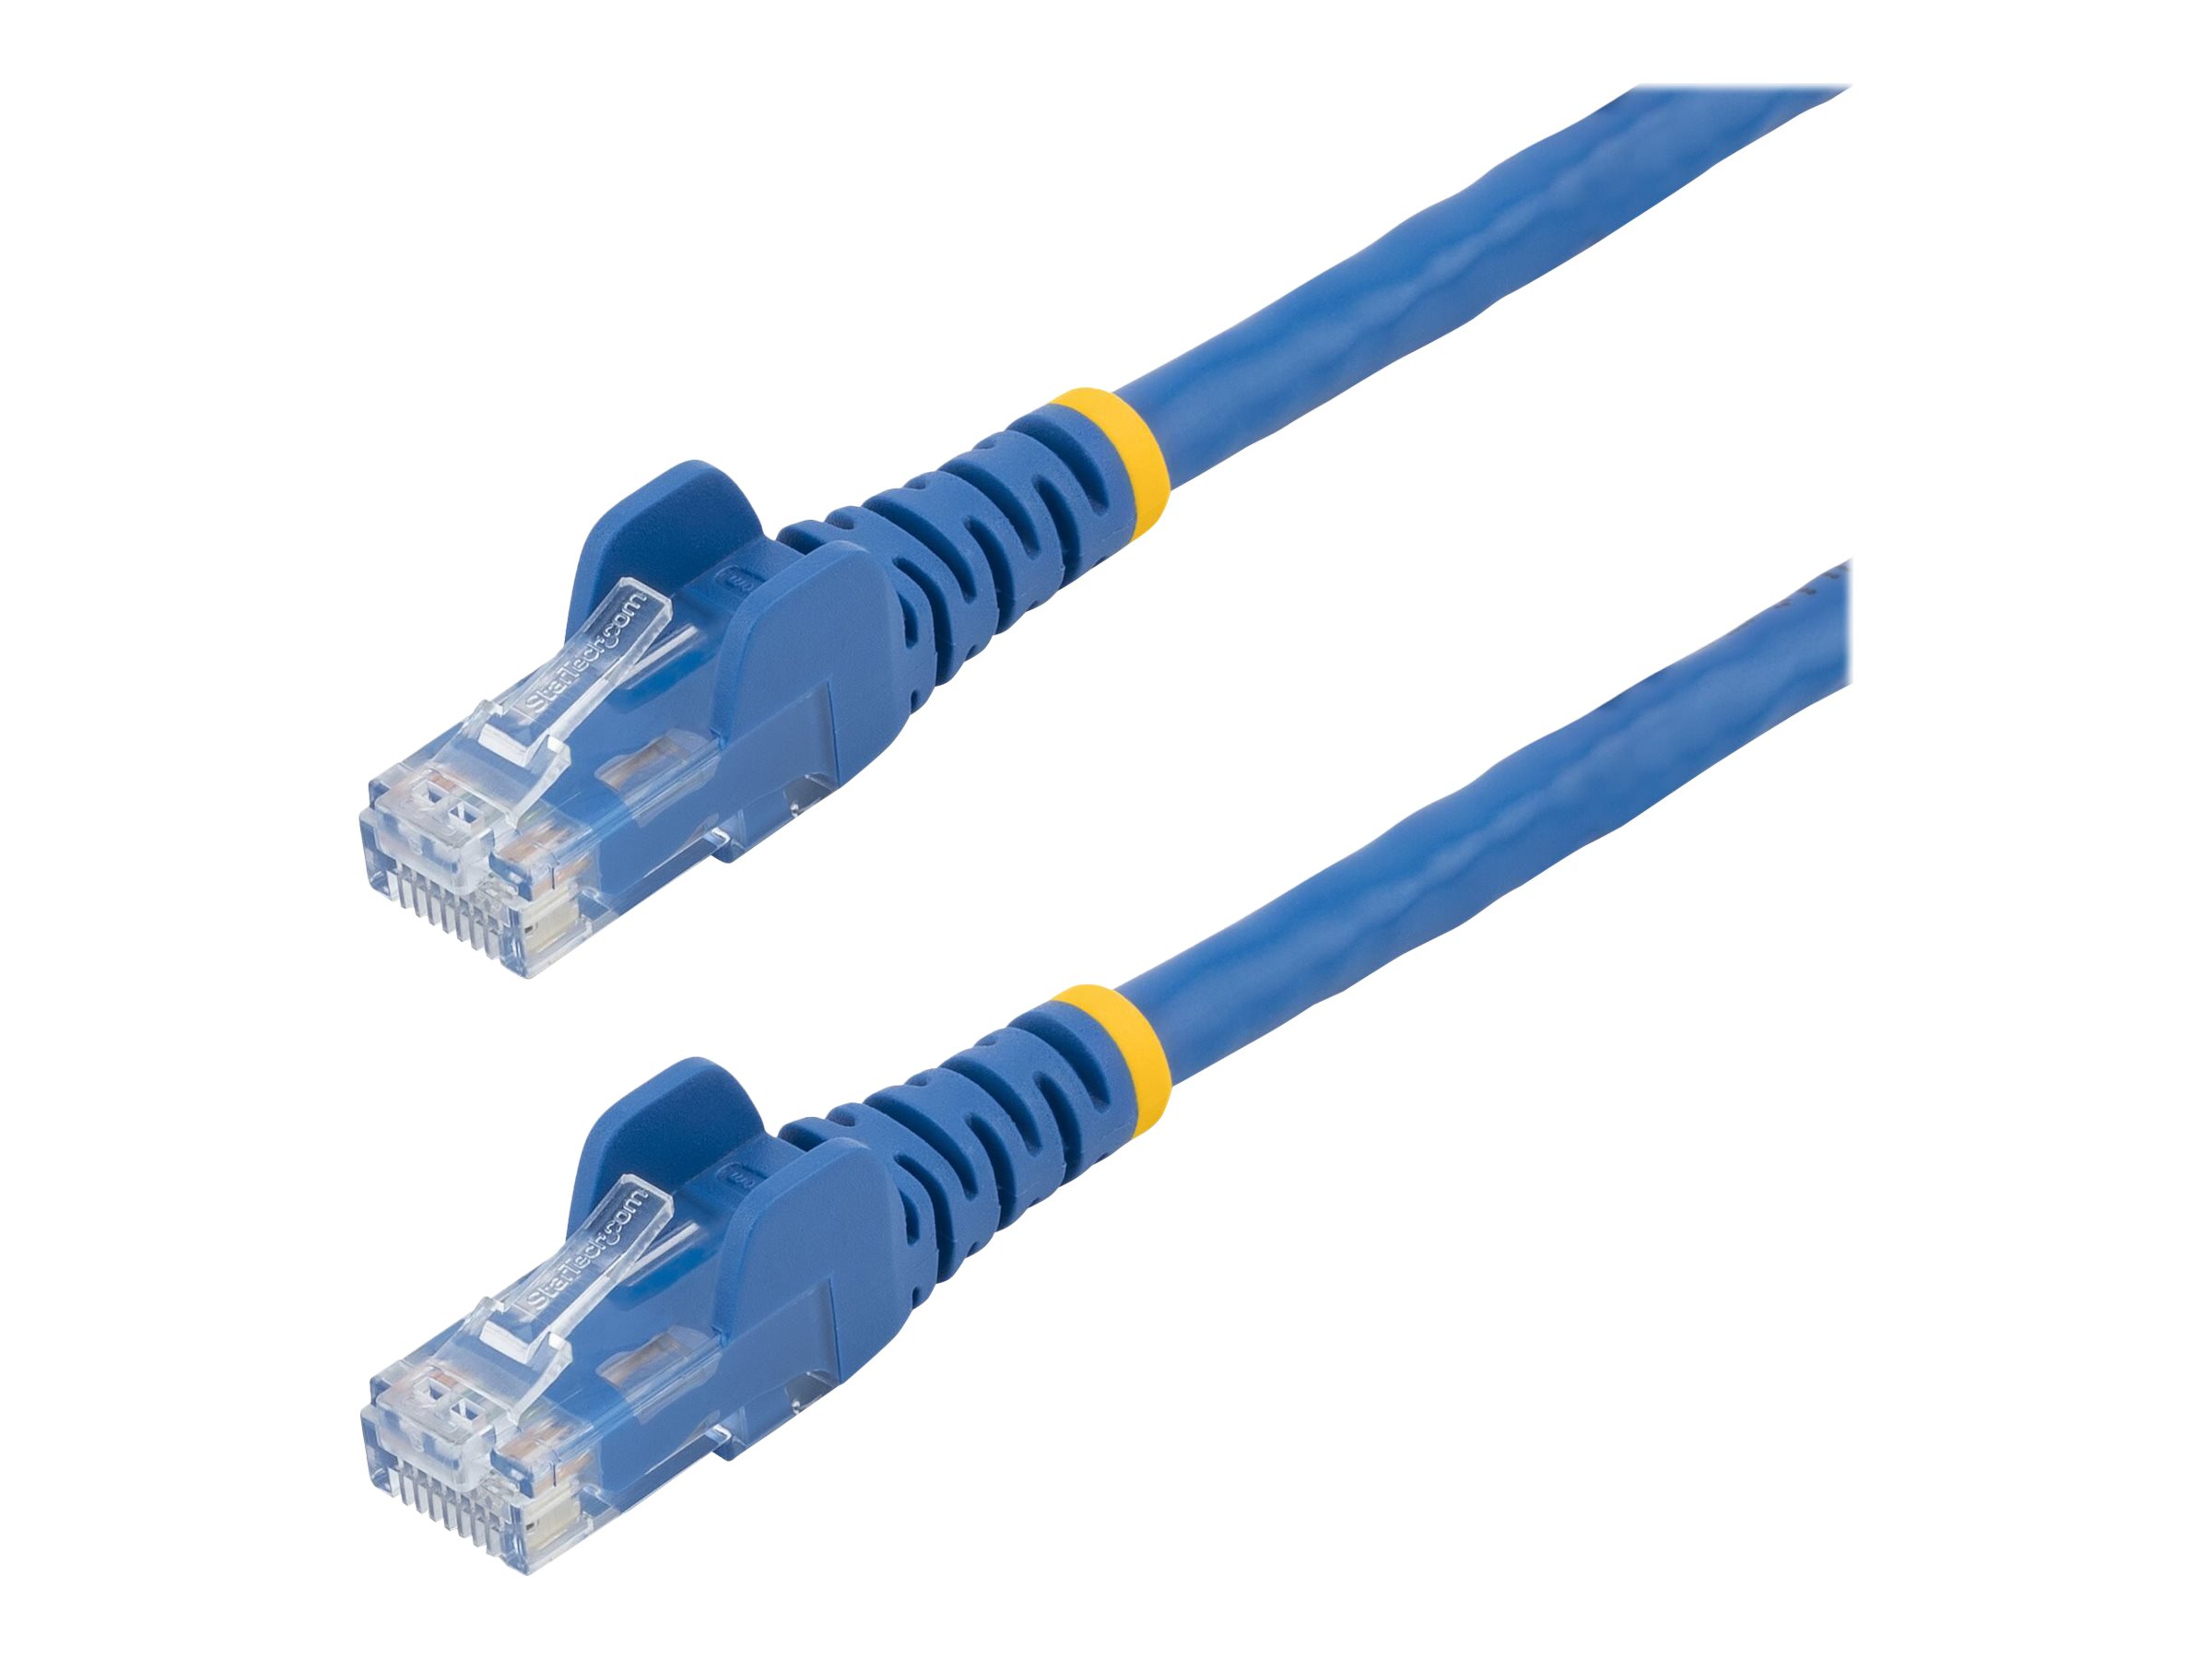 StarTech.com 3ft CAT6 Ethernet Cable, 10 Gigabit Snagless RJ45 650MHz 100W PoE Patch Cord, CAT 6 10GbE UTP Network Cable w/Strain Relief, Blue, Fluke Tested/Wiring is UL Certified/TIA